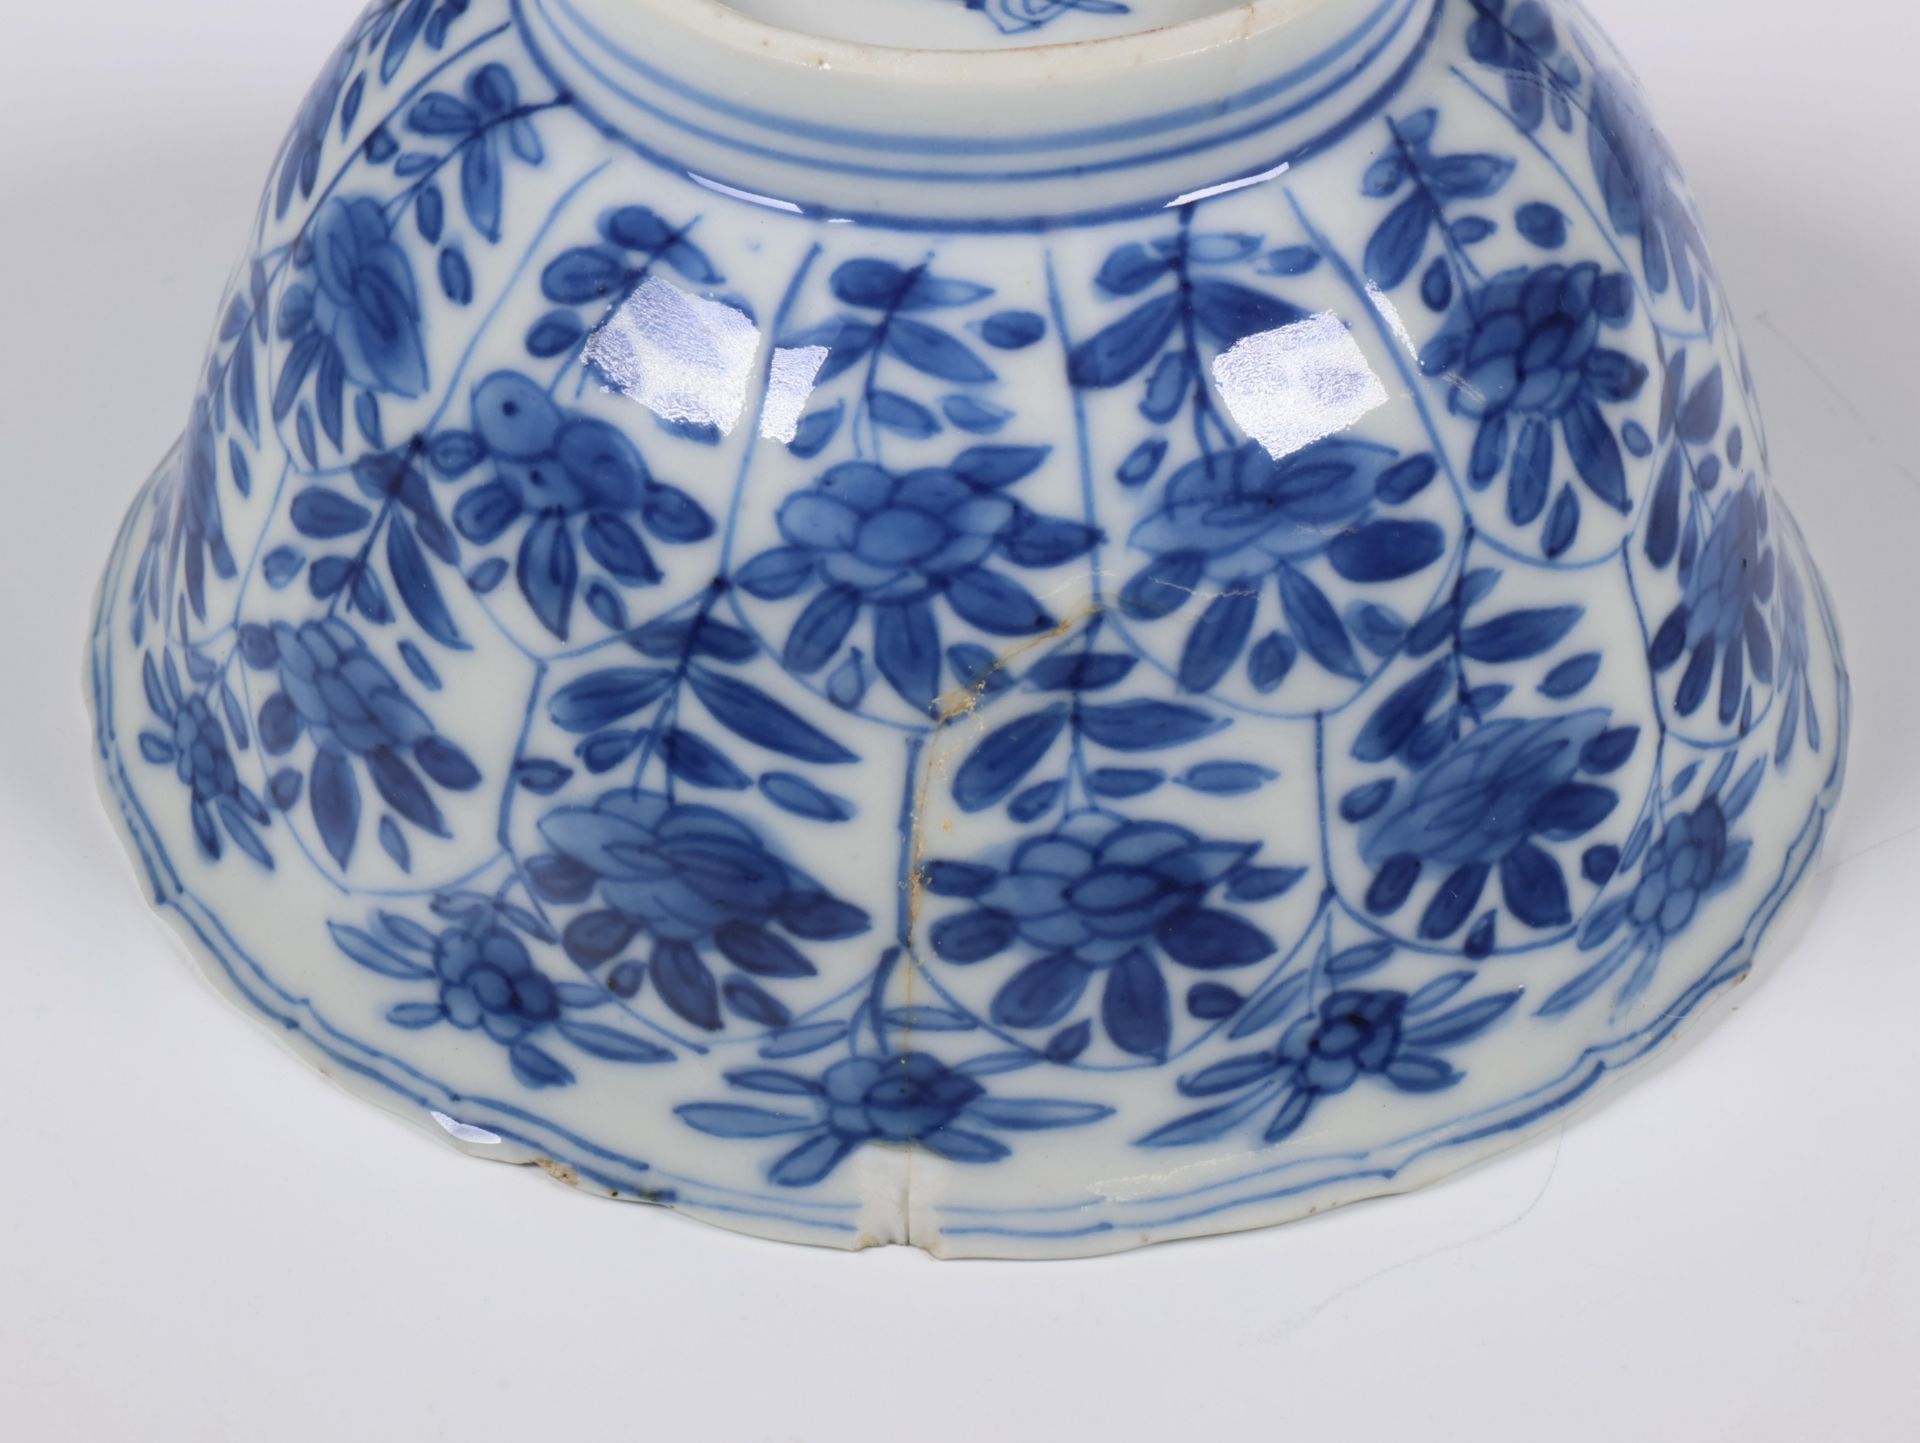 China, blue and white porcelain floral bowl, Kangxi period (1662-1722), - Image 5 of 5